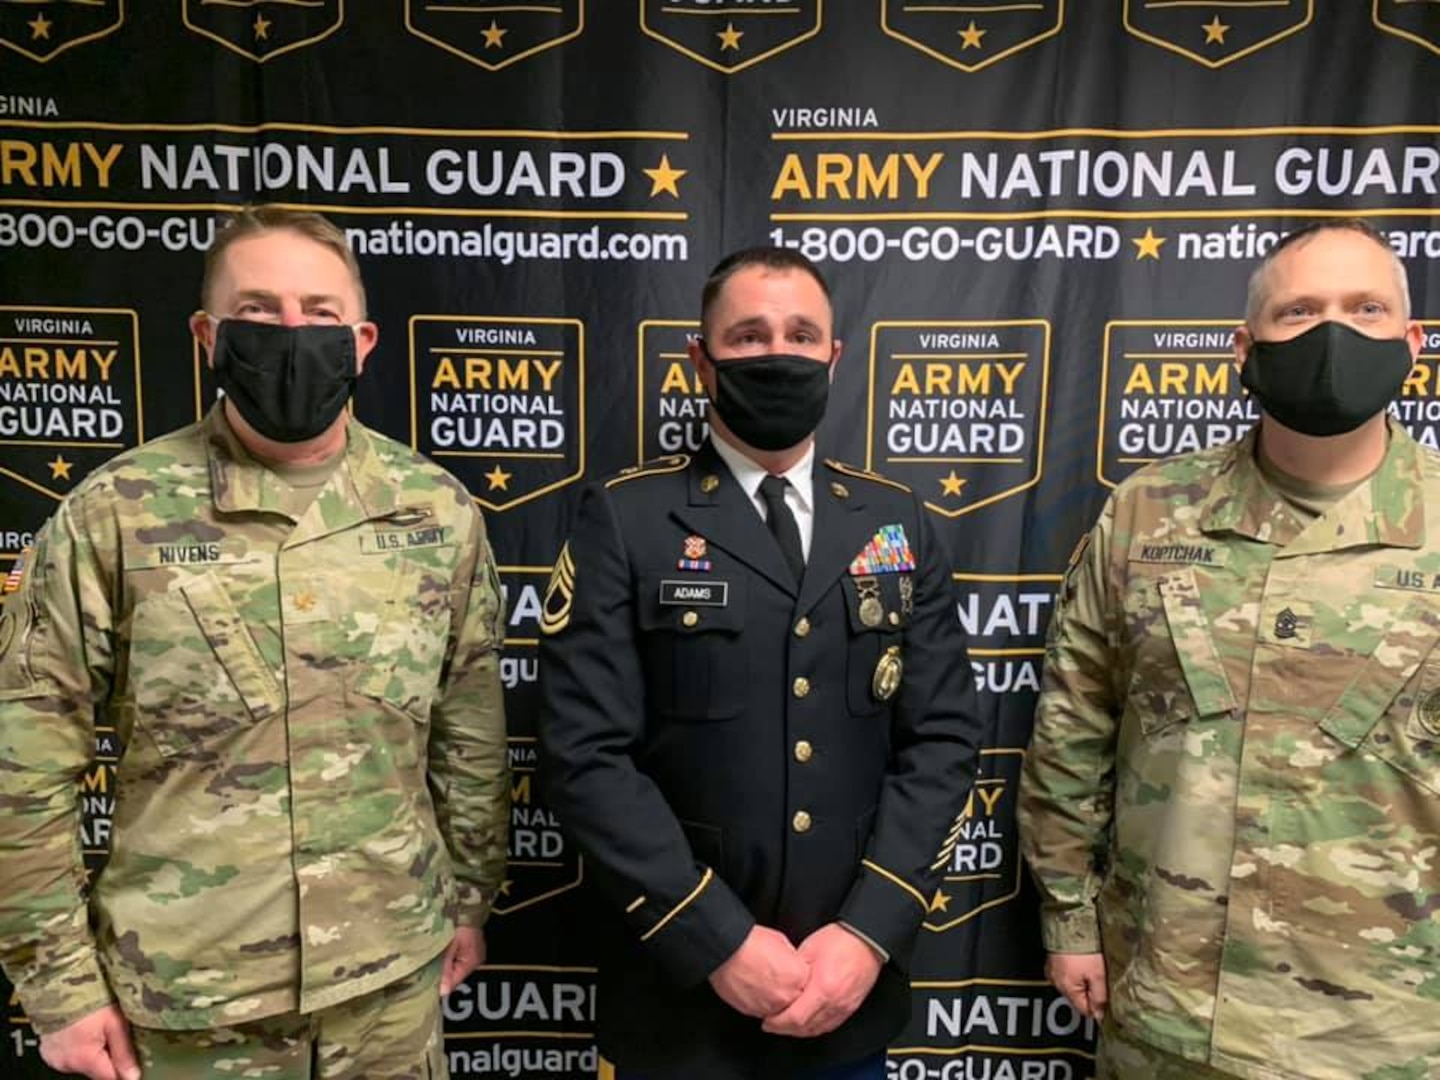 Sgt. 1st Class Brian Adams (center), poses with Maj. Scott Nivens (left), commander of the Virginia National Guard's Recruiting and Retention Battalion, and Sgt. Maj. Stephen Koptchak, the battalion's senior enlisted leader (right), at the Region II Strength Maintenance Advisory Group meeting in Gettysburg, Pennsylvania. Adams earned the top spot as the region's top recruiter and will represent the region at the national level. (Courtesy photo)